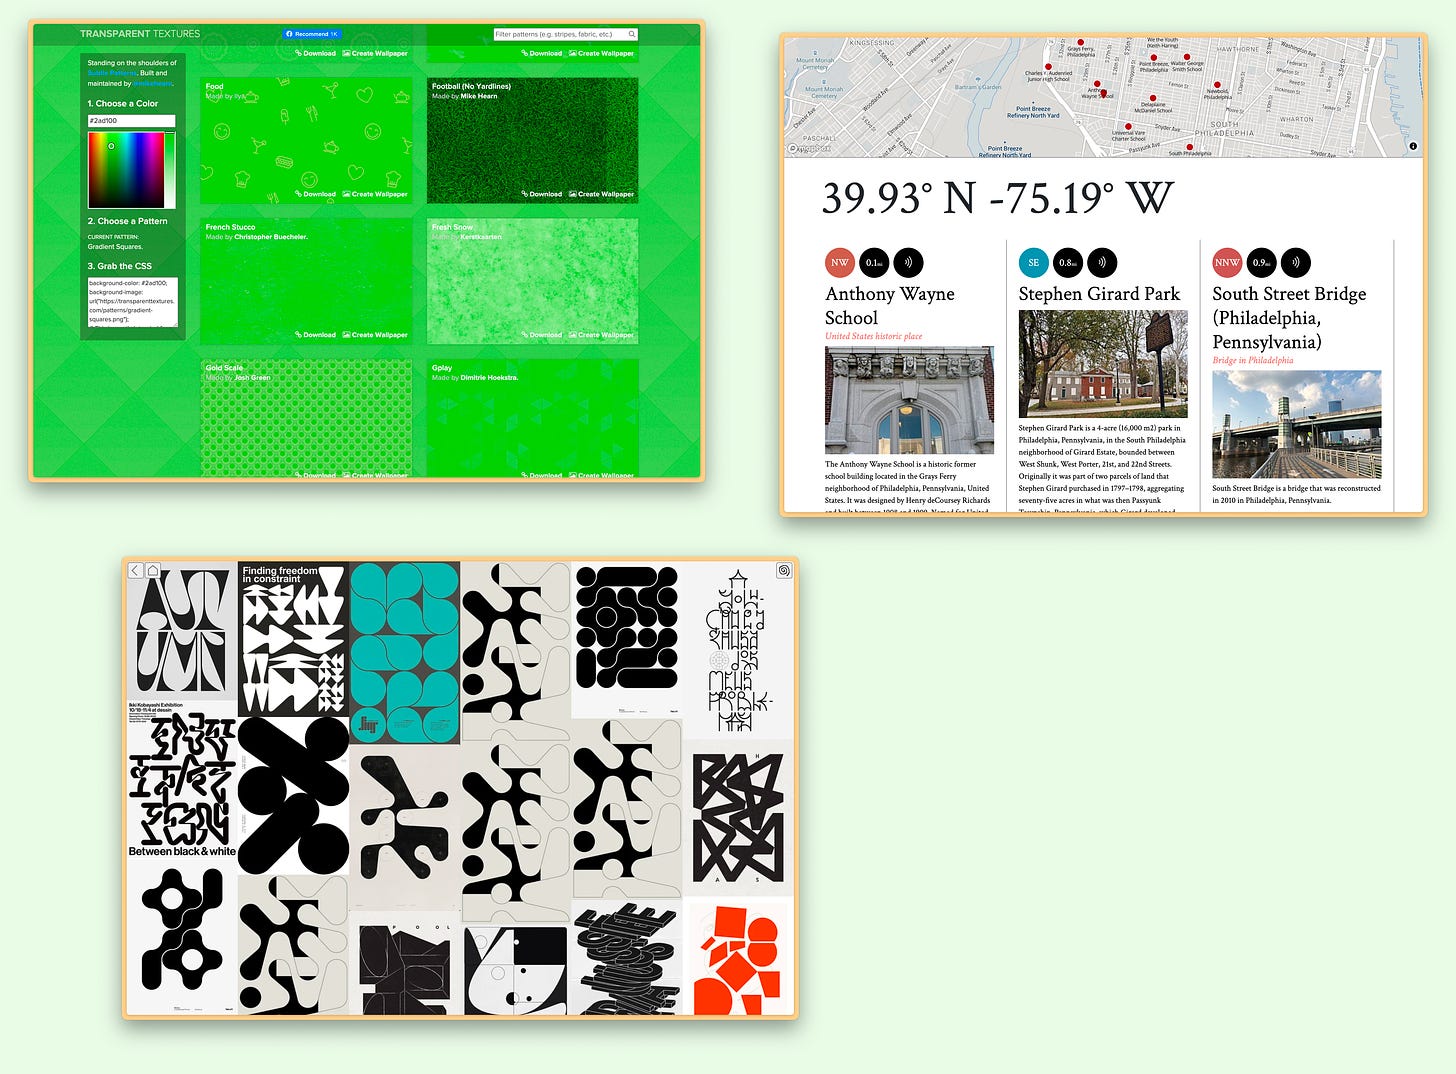 screenshots of a green webpage with different green textures, a map with a grid of landmarks around philadelphia, and a grid of images with various similar looking squiggle shapes